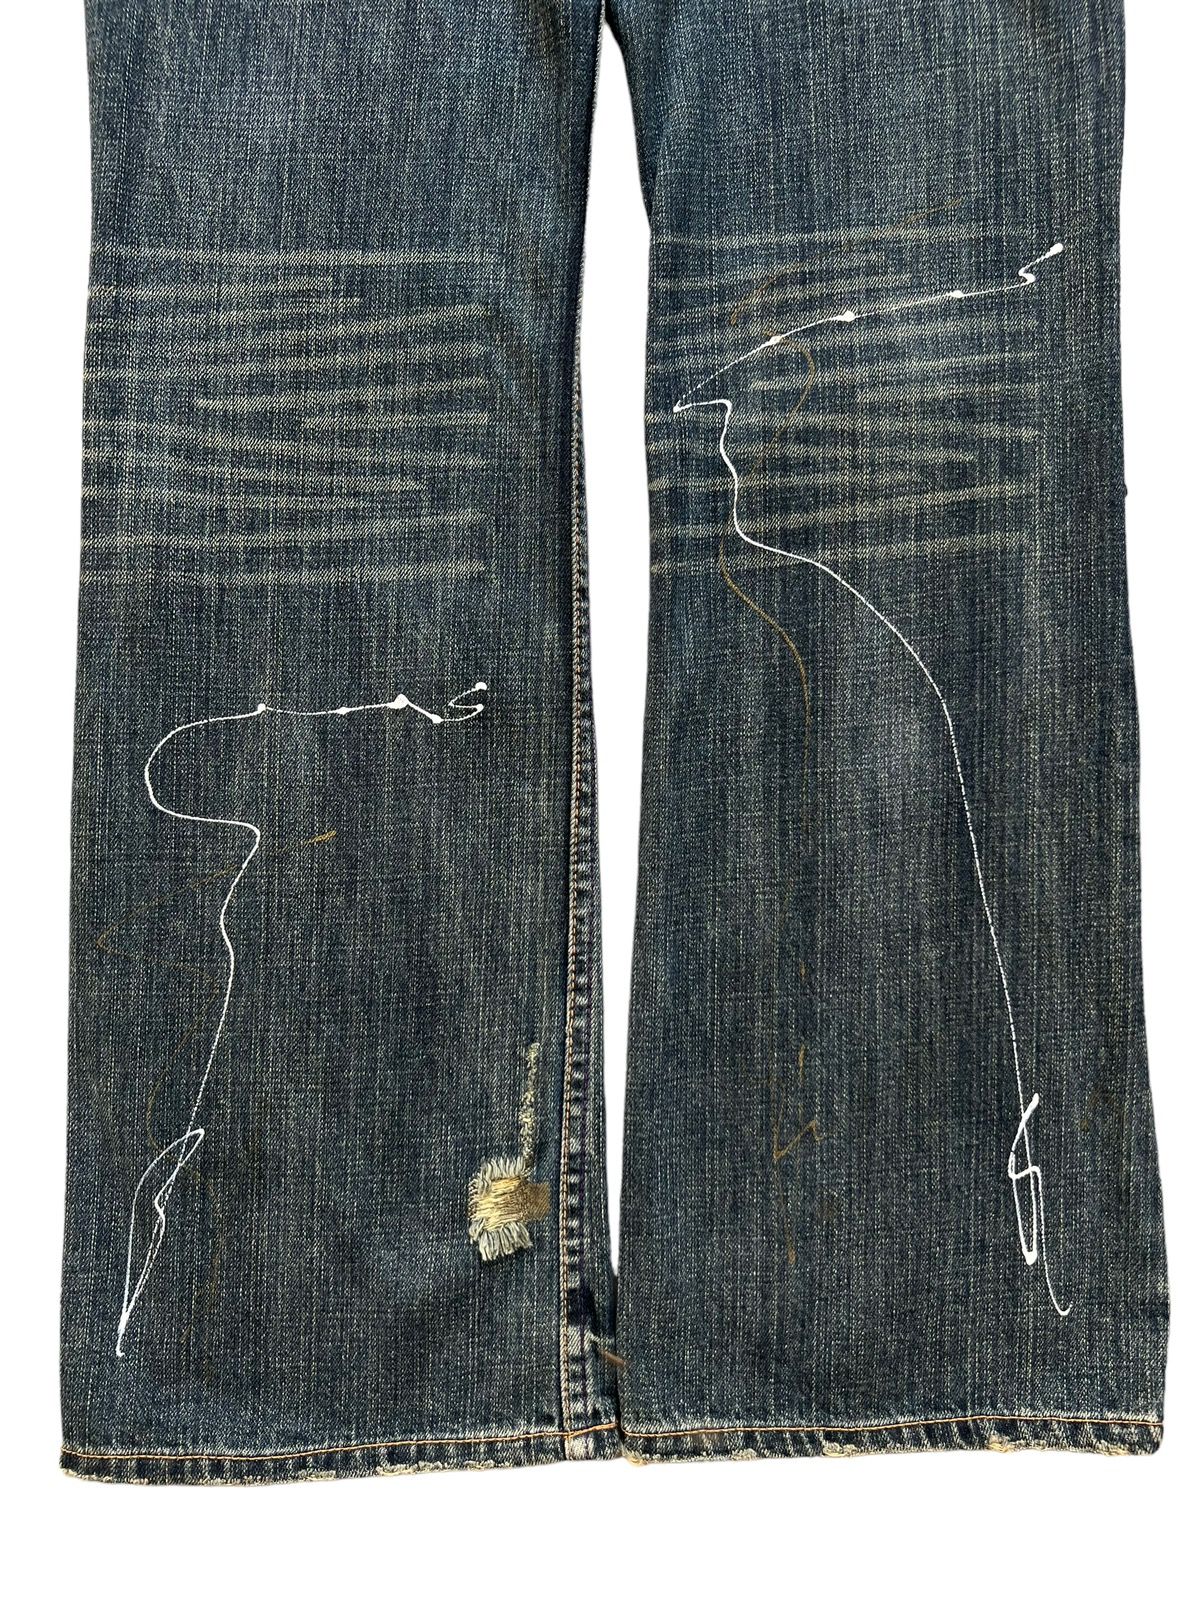 Hype - Roots Japan Distressed Riped Rusty Denim Painted Jeans 33x33 - 7